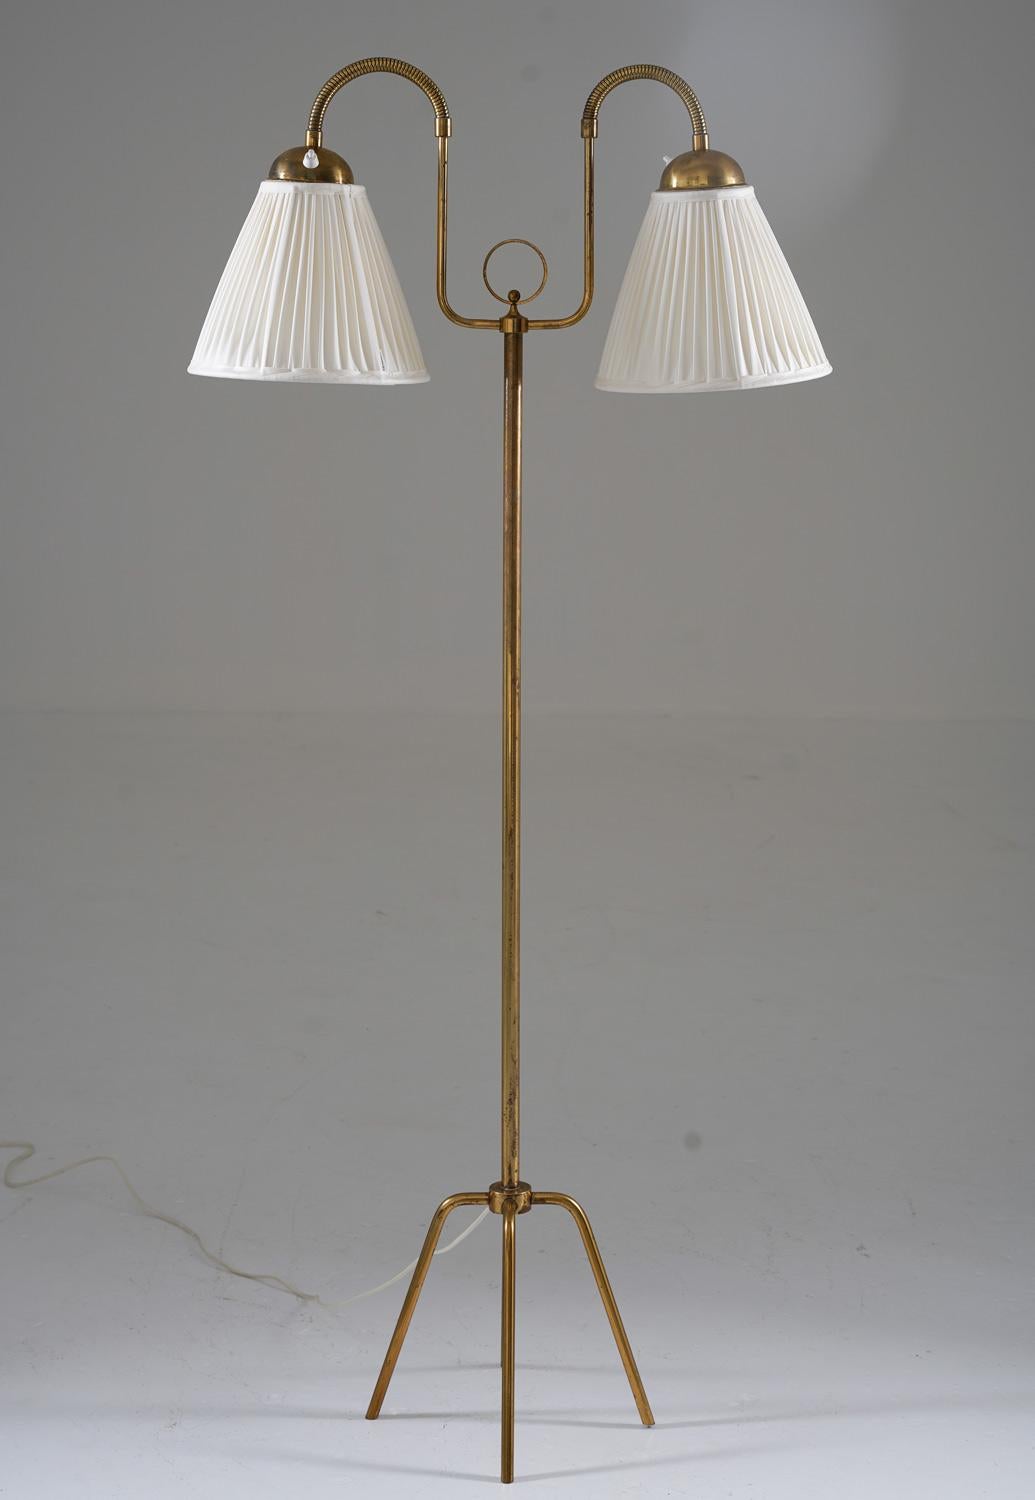 Swedish Modern floor lamp in brass, manufactured during the 1940s.
This elegant floor lamp has two light sources on adjustable arms.

Condition: Good original condition with patina (dark spots on the brass). The lamp comes with new hand-pleated